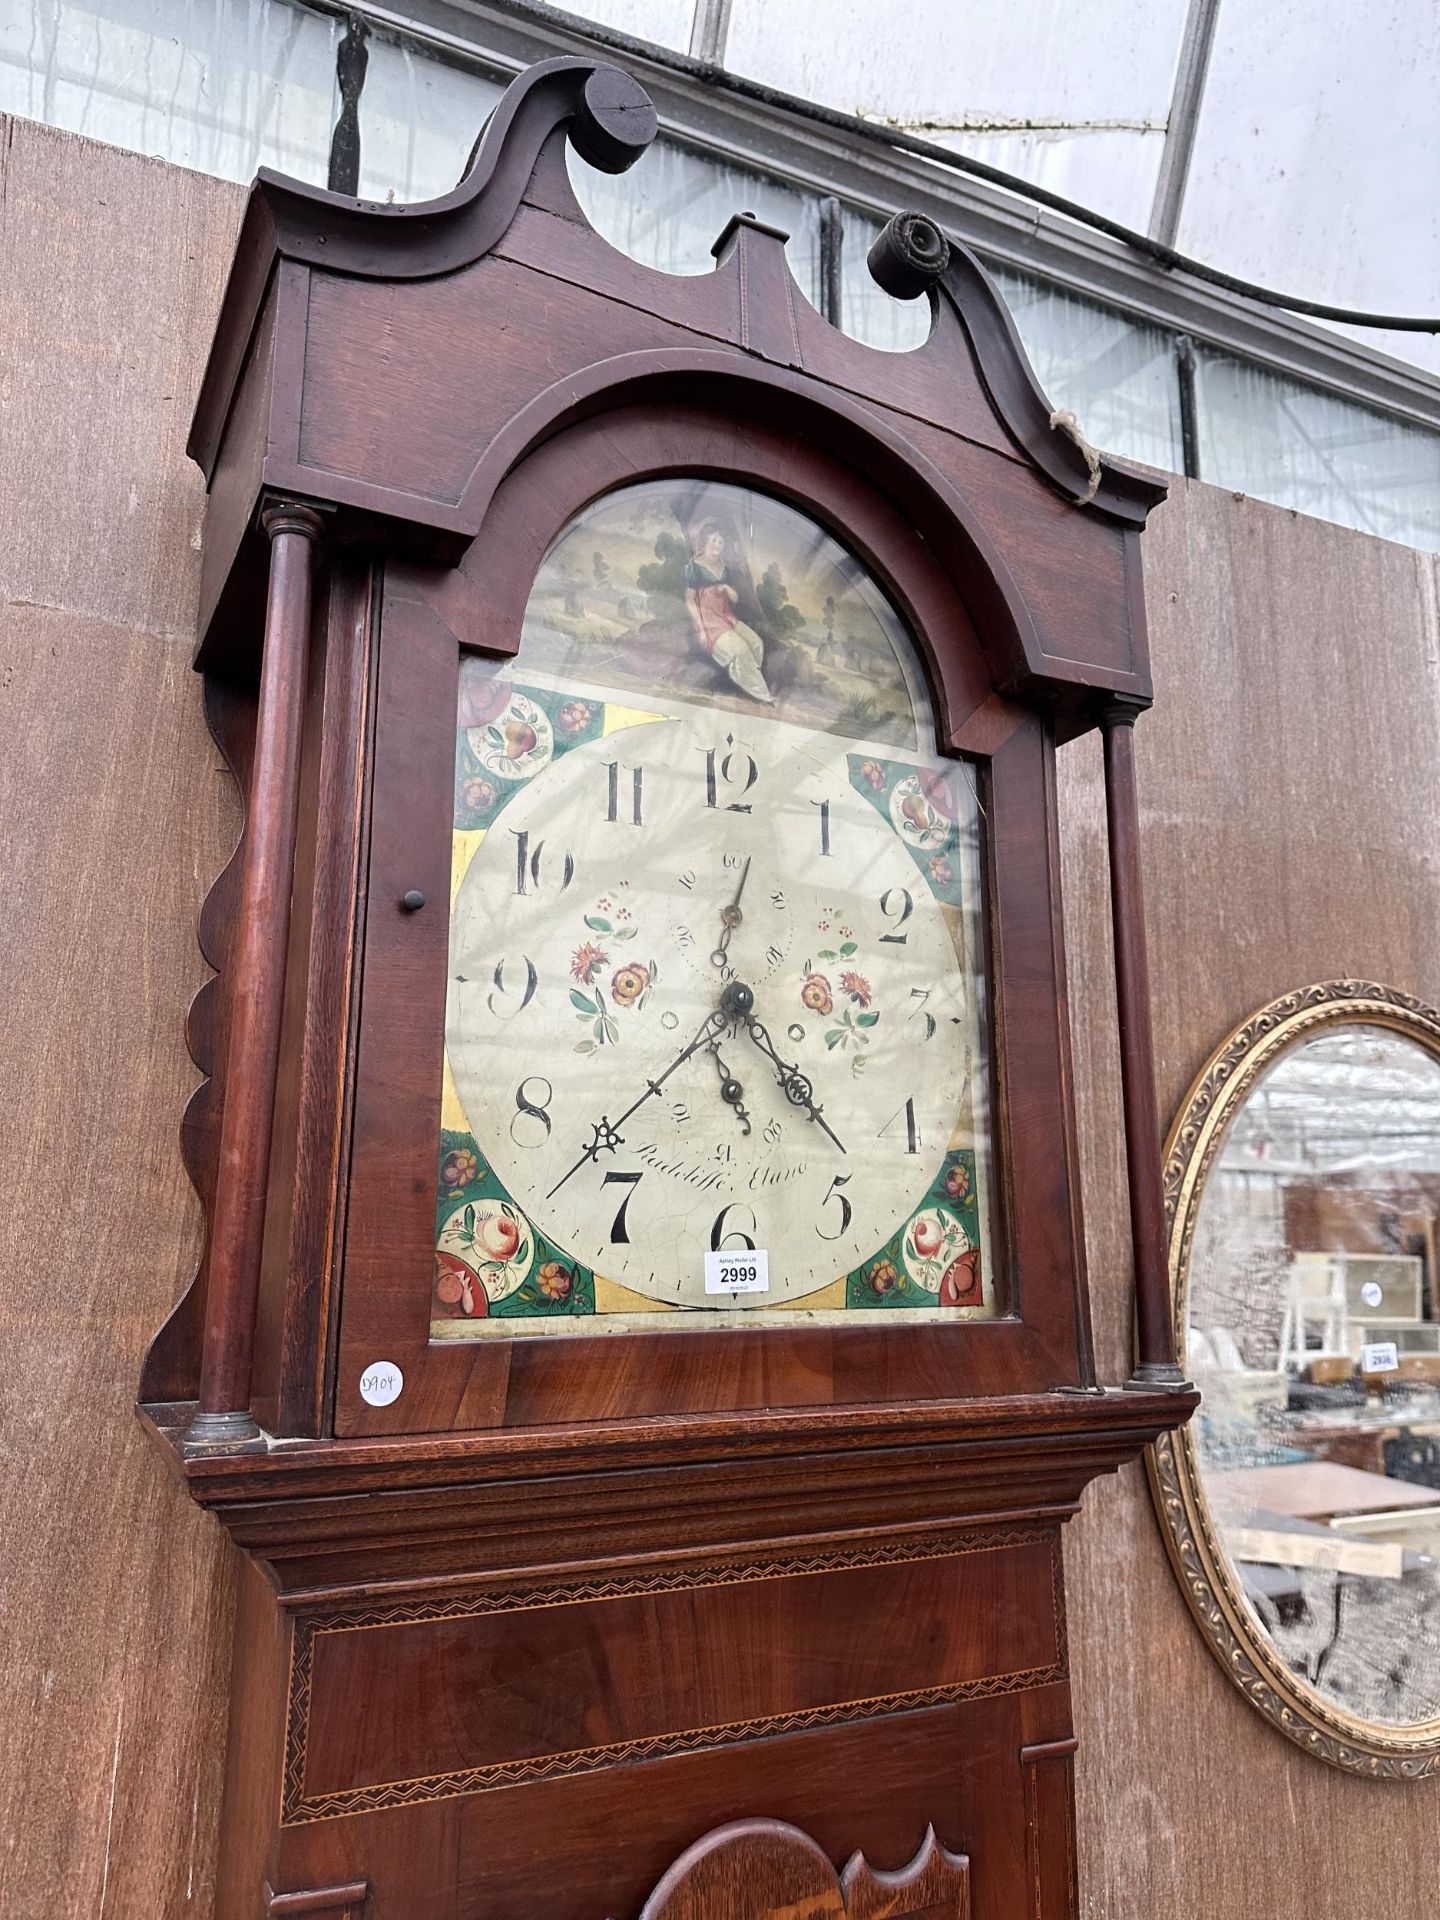 A 19TH CENTURY MAHOGANY AND CROSSBANDED 30 HOUR LONGCASE CLOCK WITH ENAMEL DIAL, RADCLIFFE ELAND - Image 2 of 5